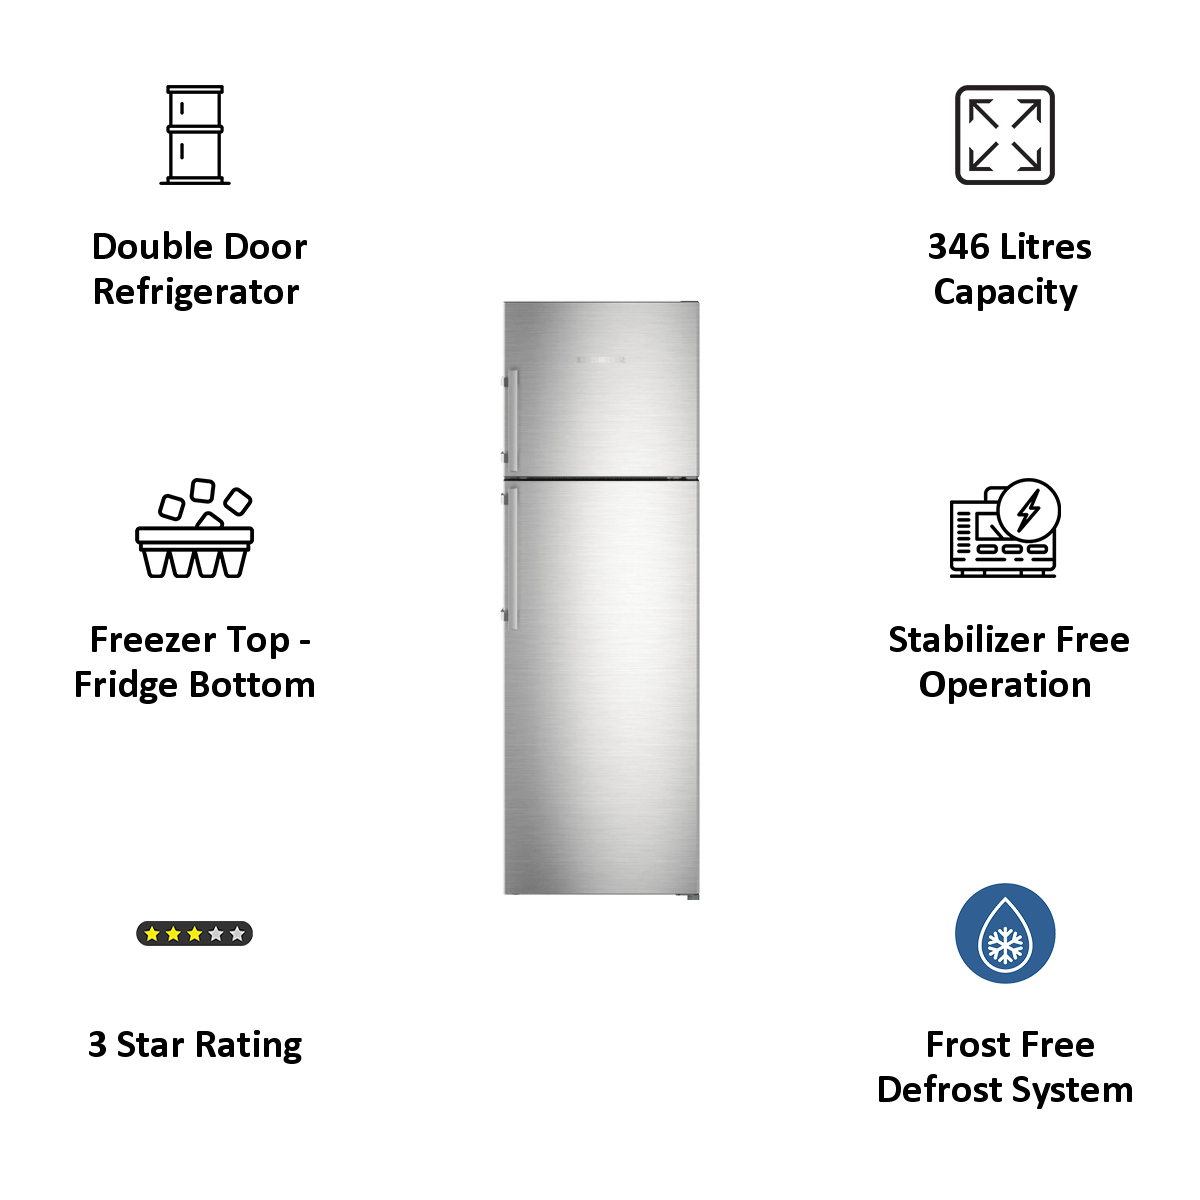 Liebherr 346 Litres 3 Star Frost Free Inverter Double Door Refrigerator (Central Power Cooling, TCss 3520, Stainless Steel)_4